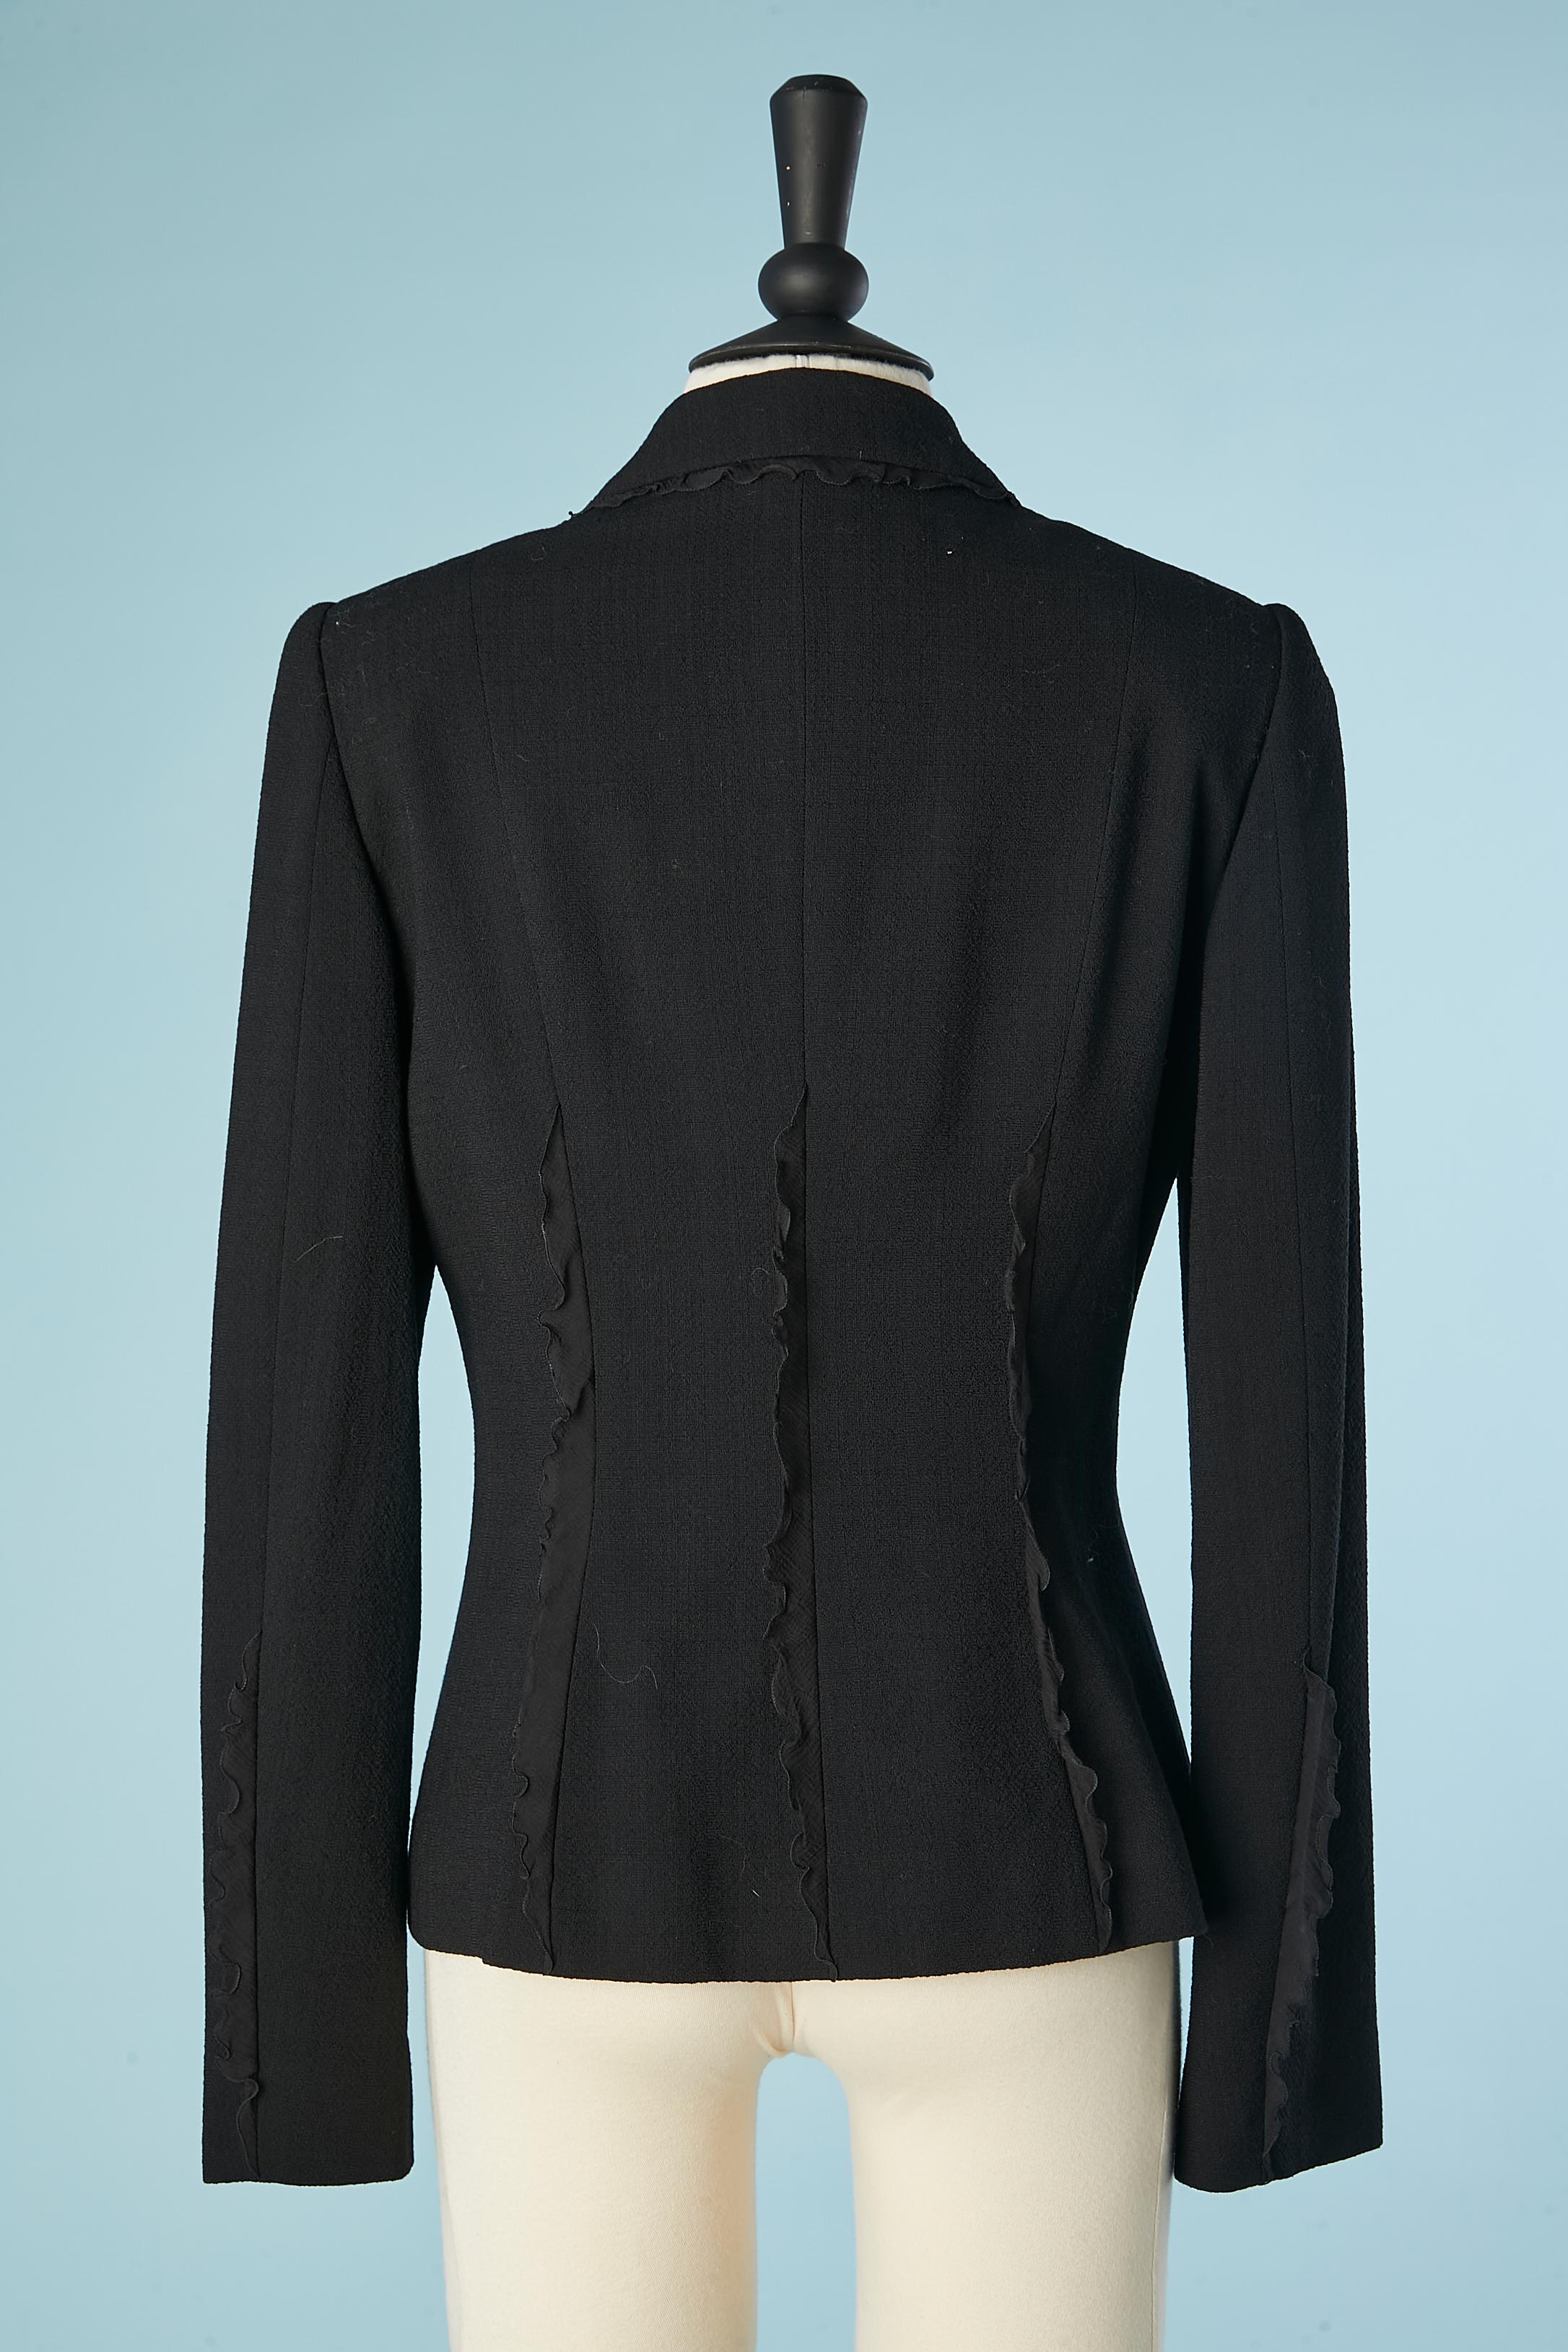 Black wool jacket with black silk chiffon ruffles Moschino Cheap and Chic  For Sale 1